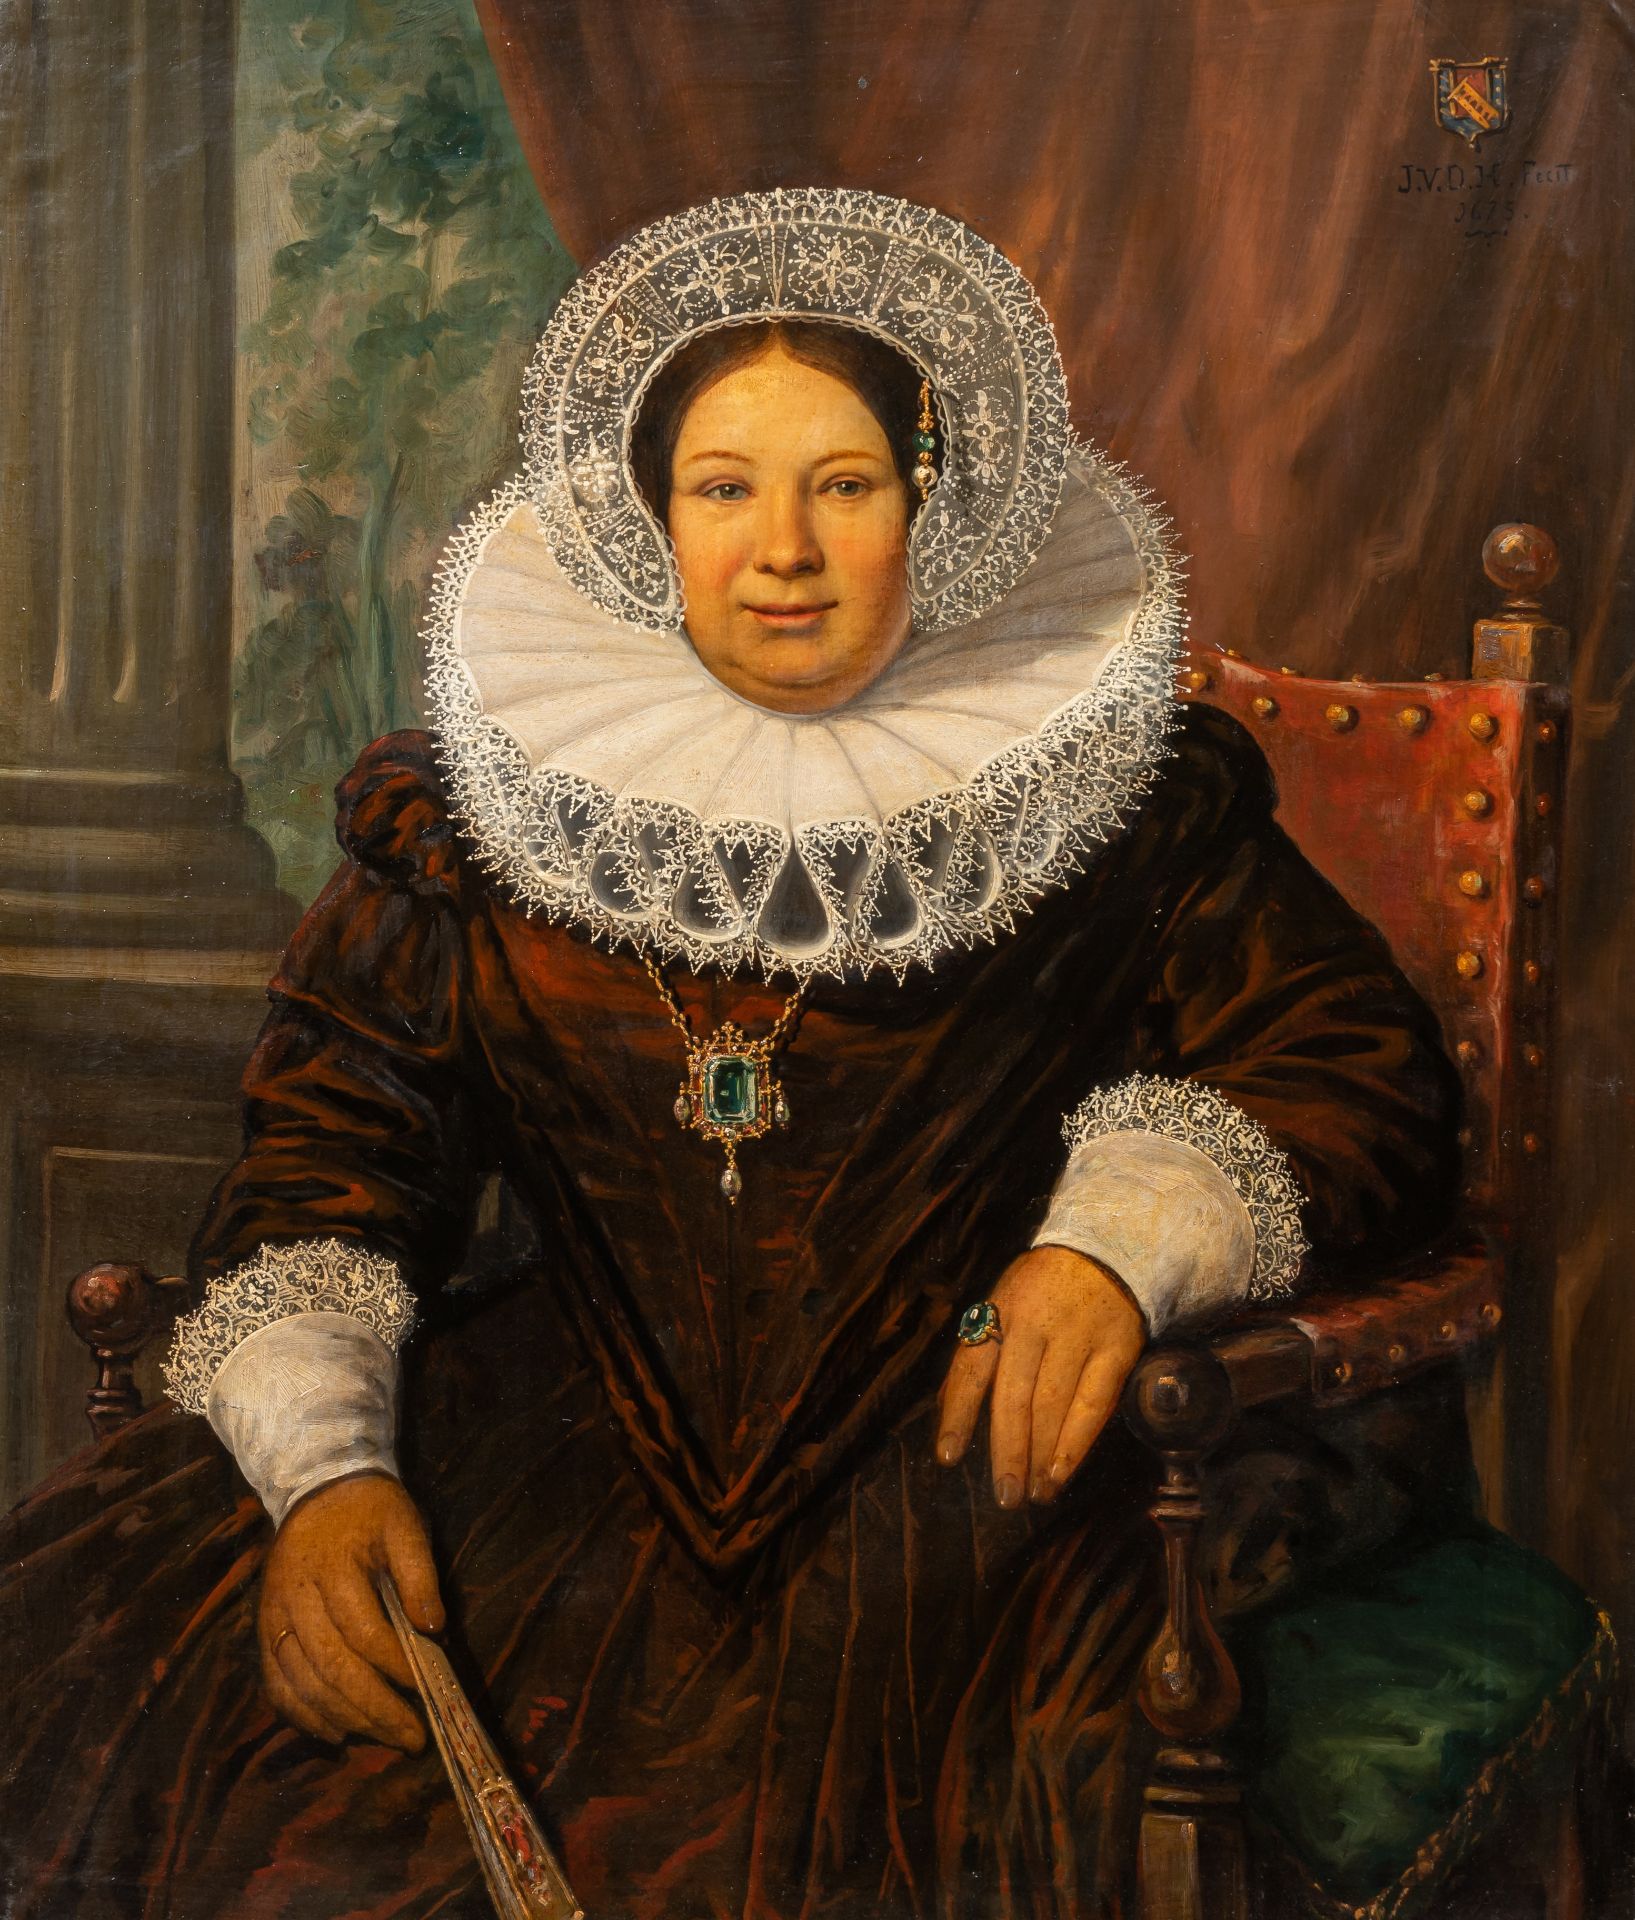 The portrait of a lavishly dressed noble lady holding a fan, 19thC, oil on canvas 104 x 88 cm. (40.9